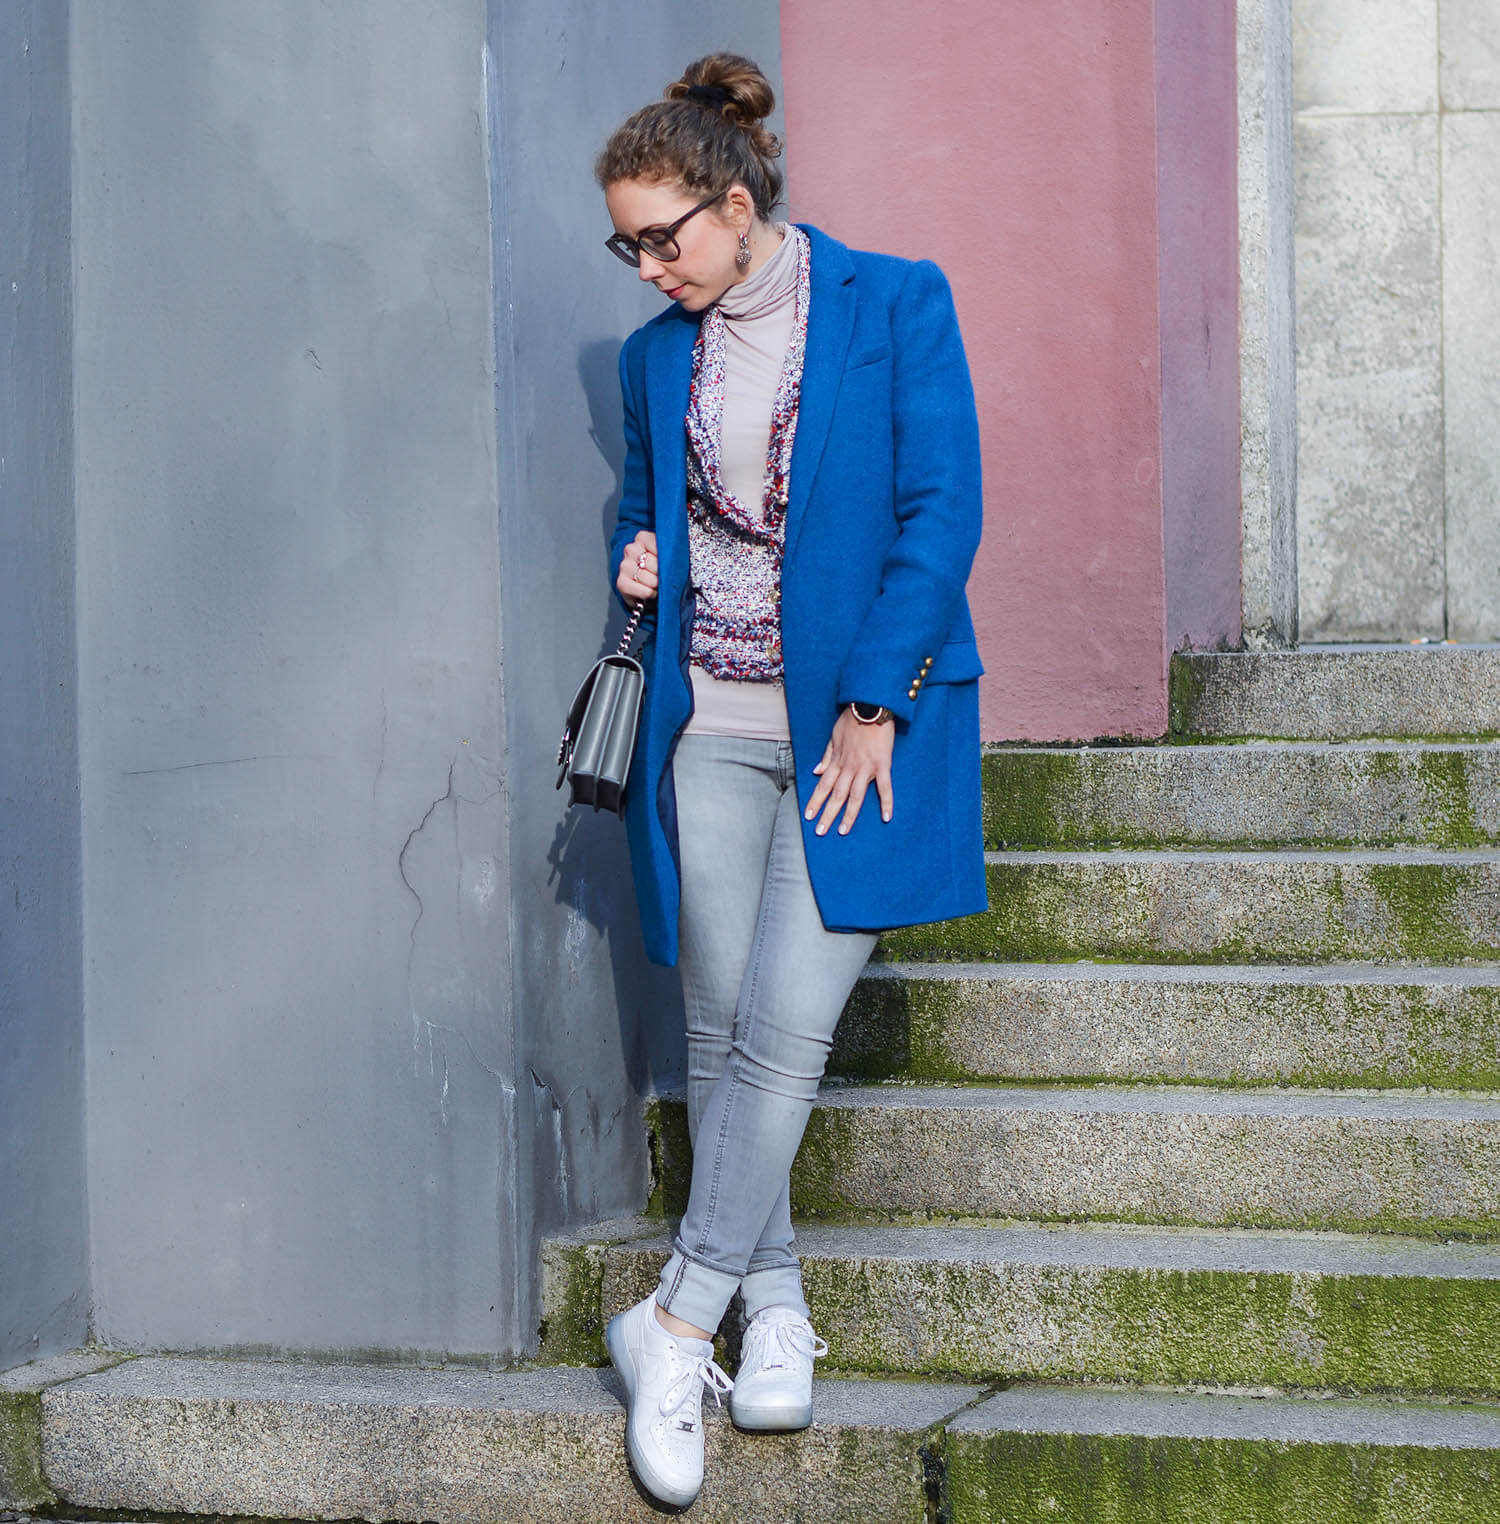 Outfit-Classy-meets-Casual-Tweed-Coat-and-Jacket-with-Jeans-and-Sneakers-kationette-fashionblogger-nrw